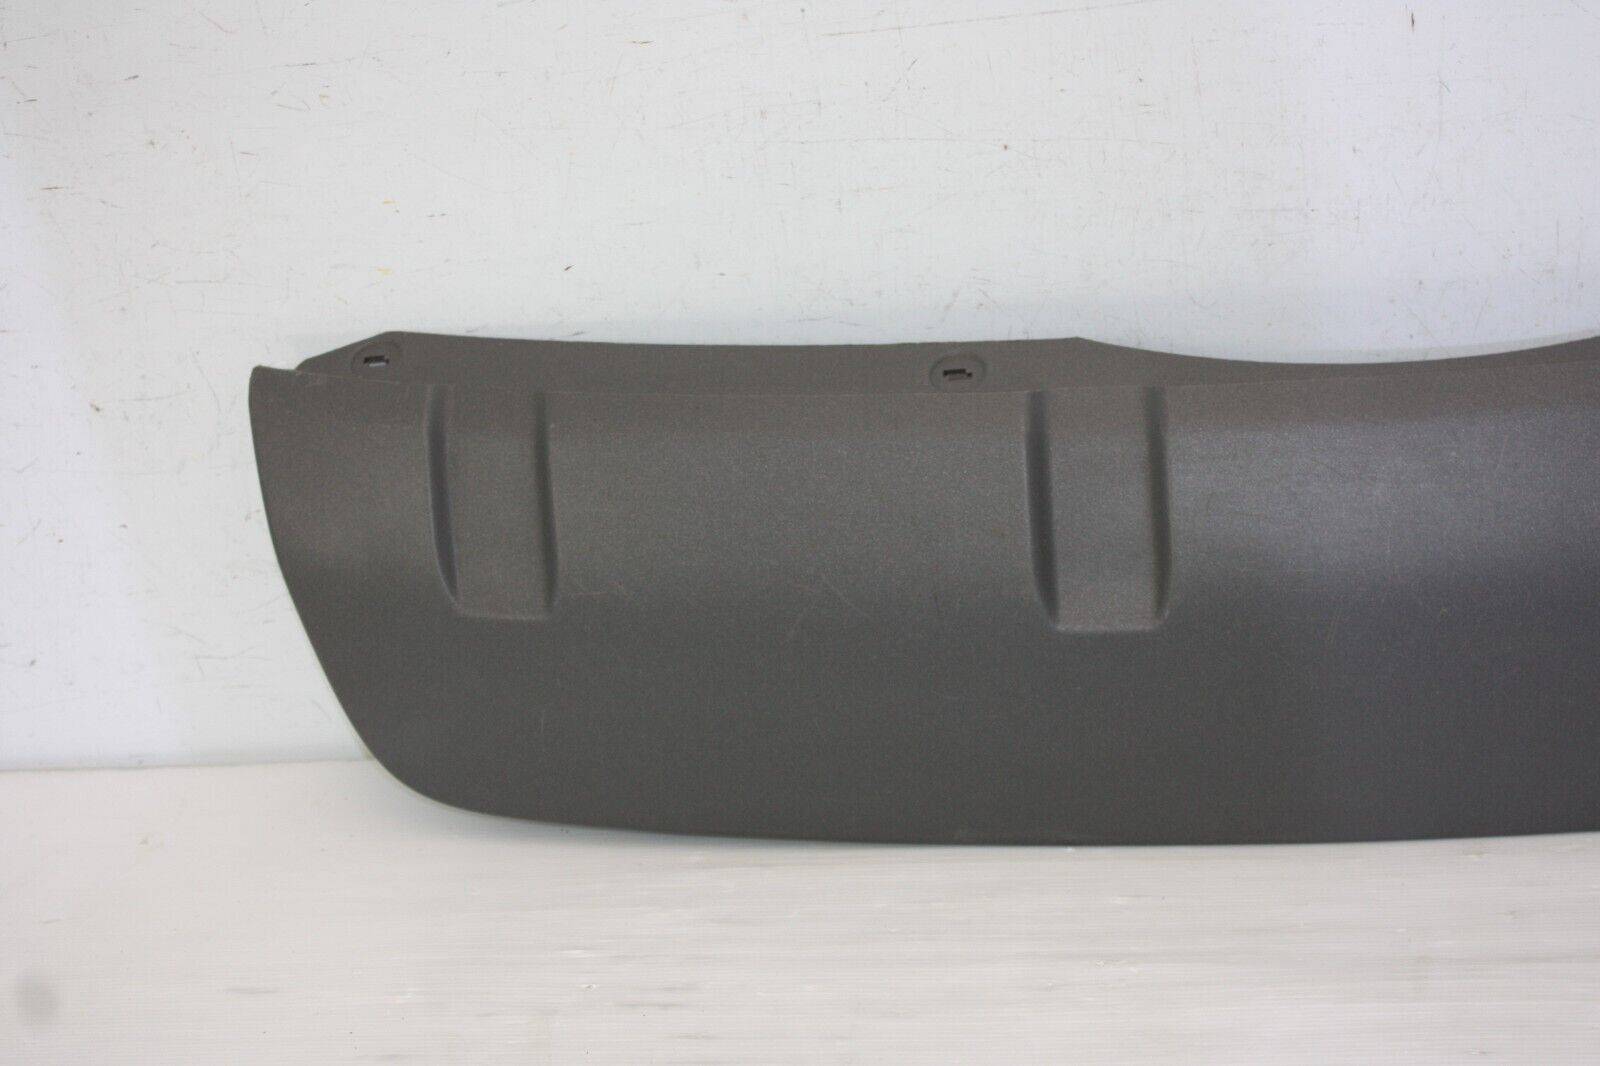 Land-Rover-Discovery-Rear-Bumper-Tow-Eye-Cover-2017-ON-HY32-17K950-AA-Genuine-175585706077-2